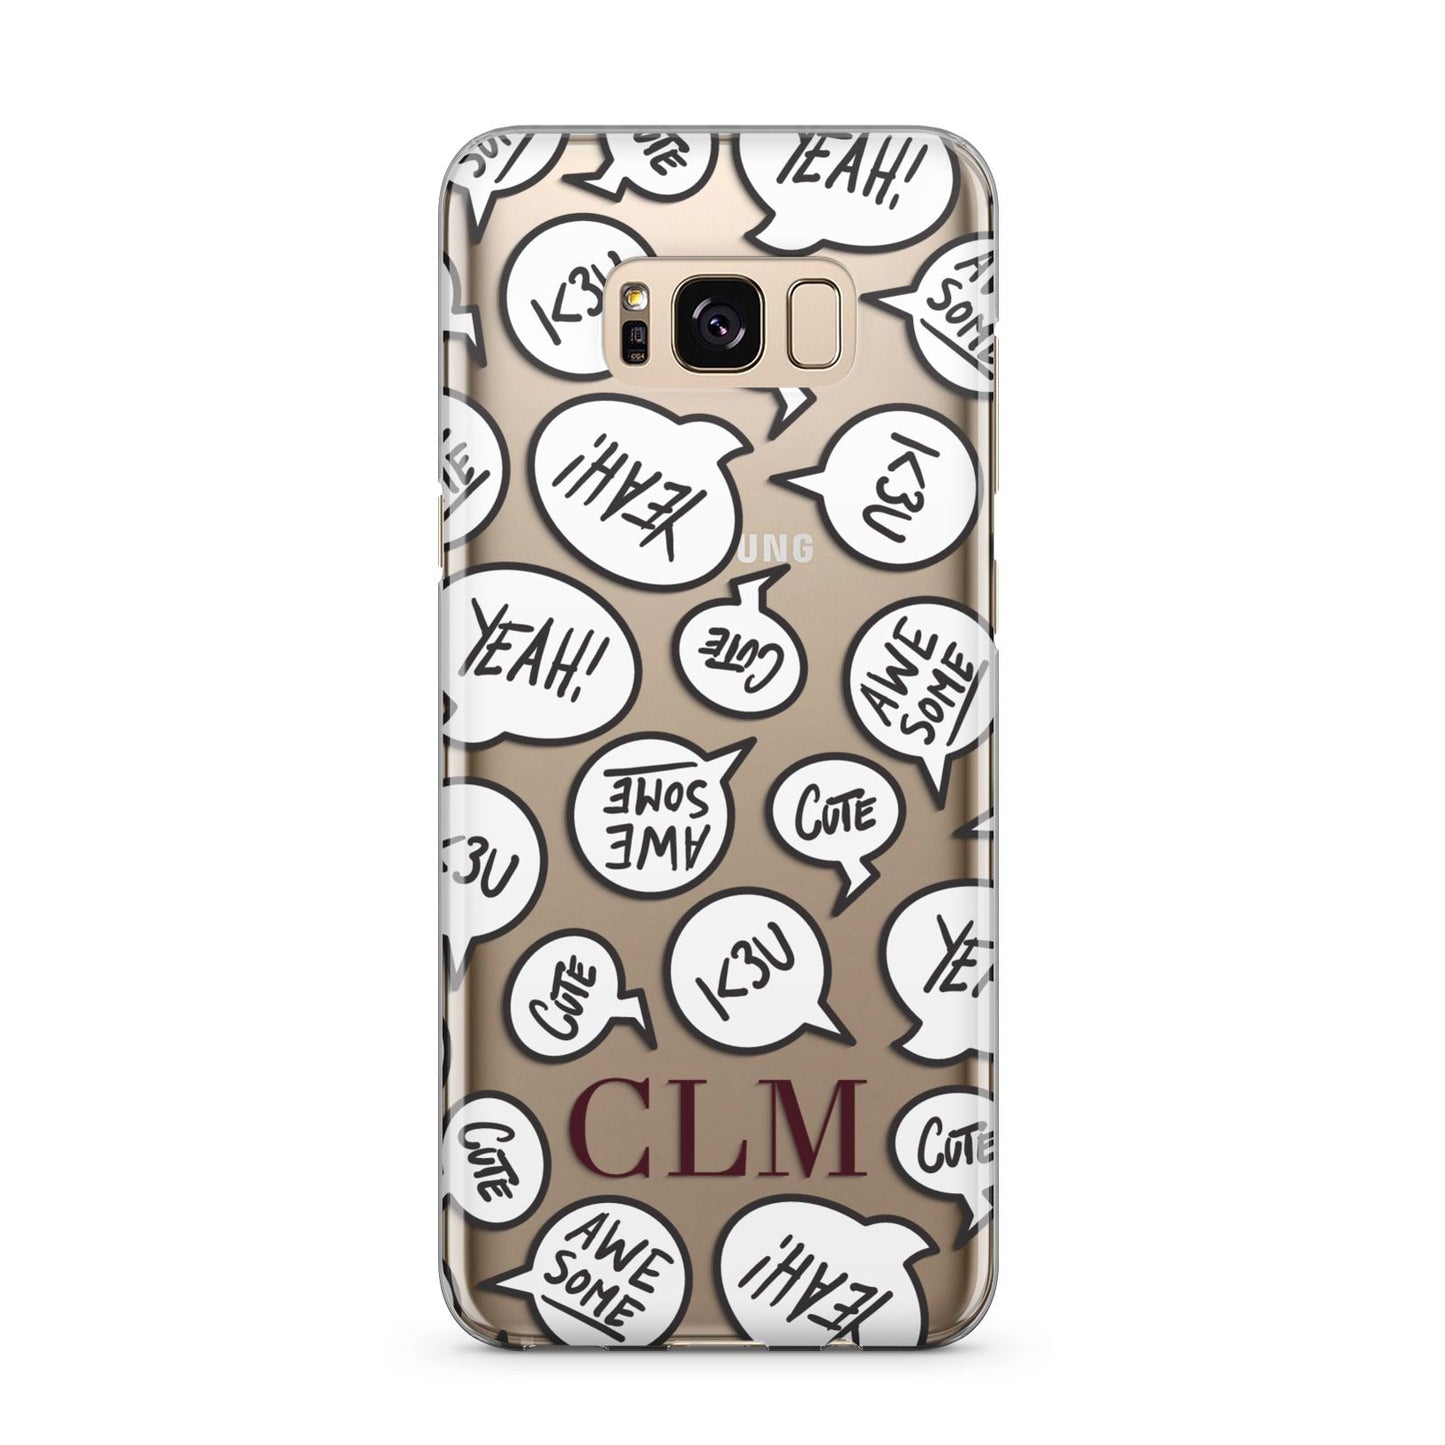 Personalised Sayings With Initials Samsung Galaxy S8 Plus Case